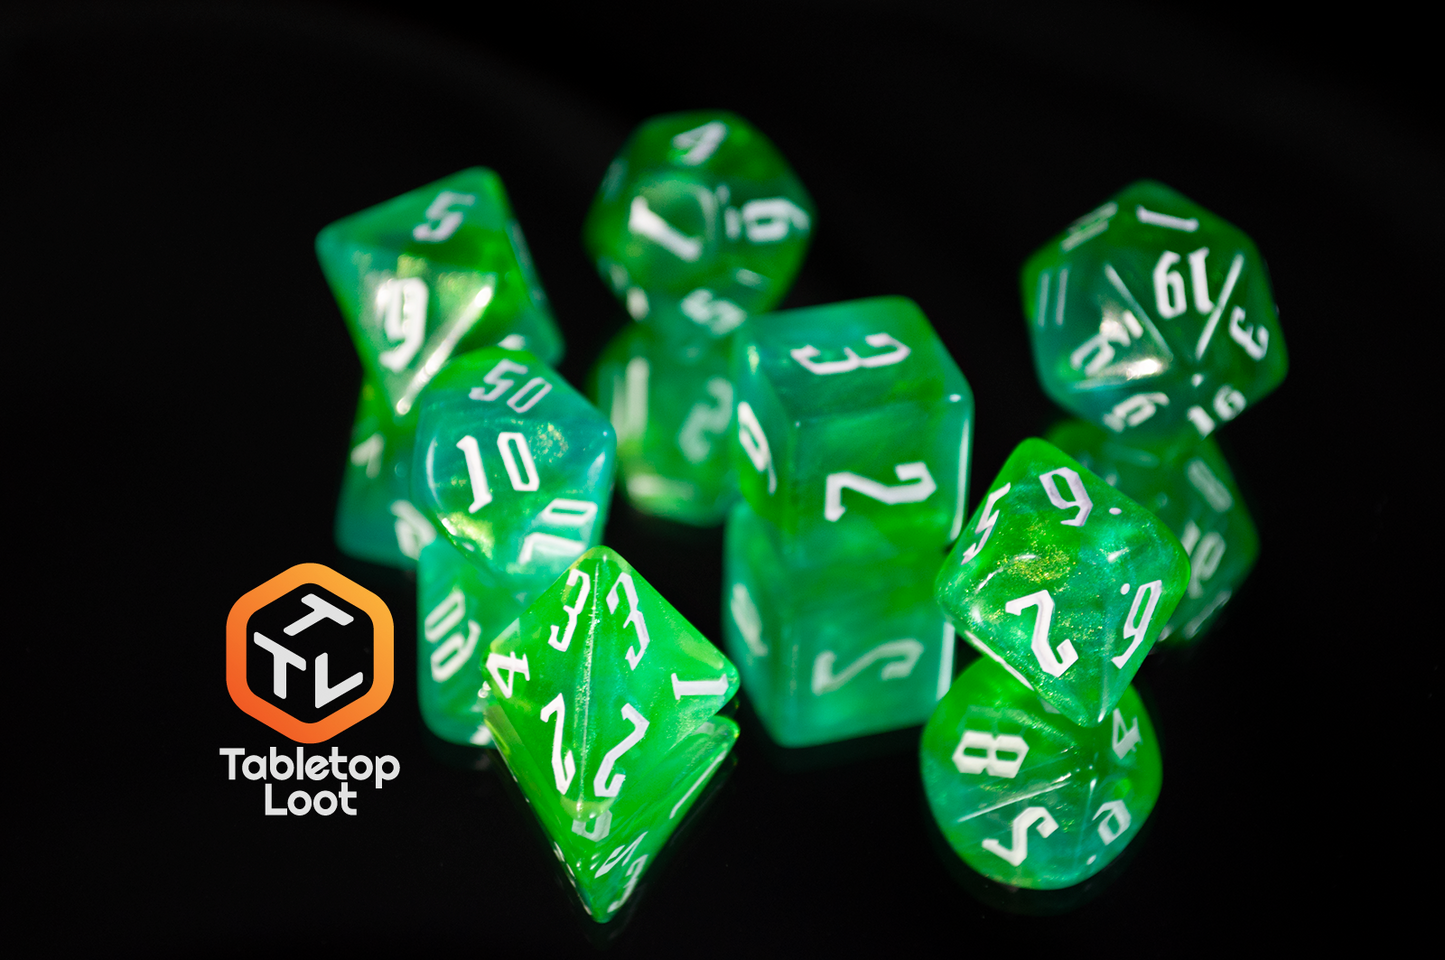 The Nature's Fury 7 piece dice set from Tabletop Loot with shimmering translucent green resin and white numbering.